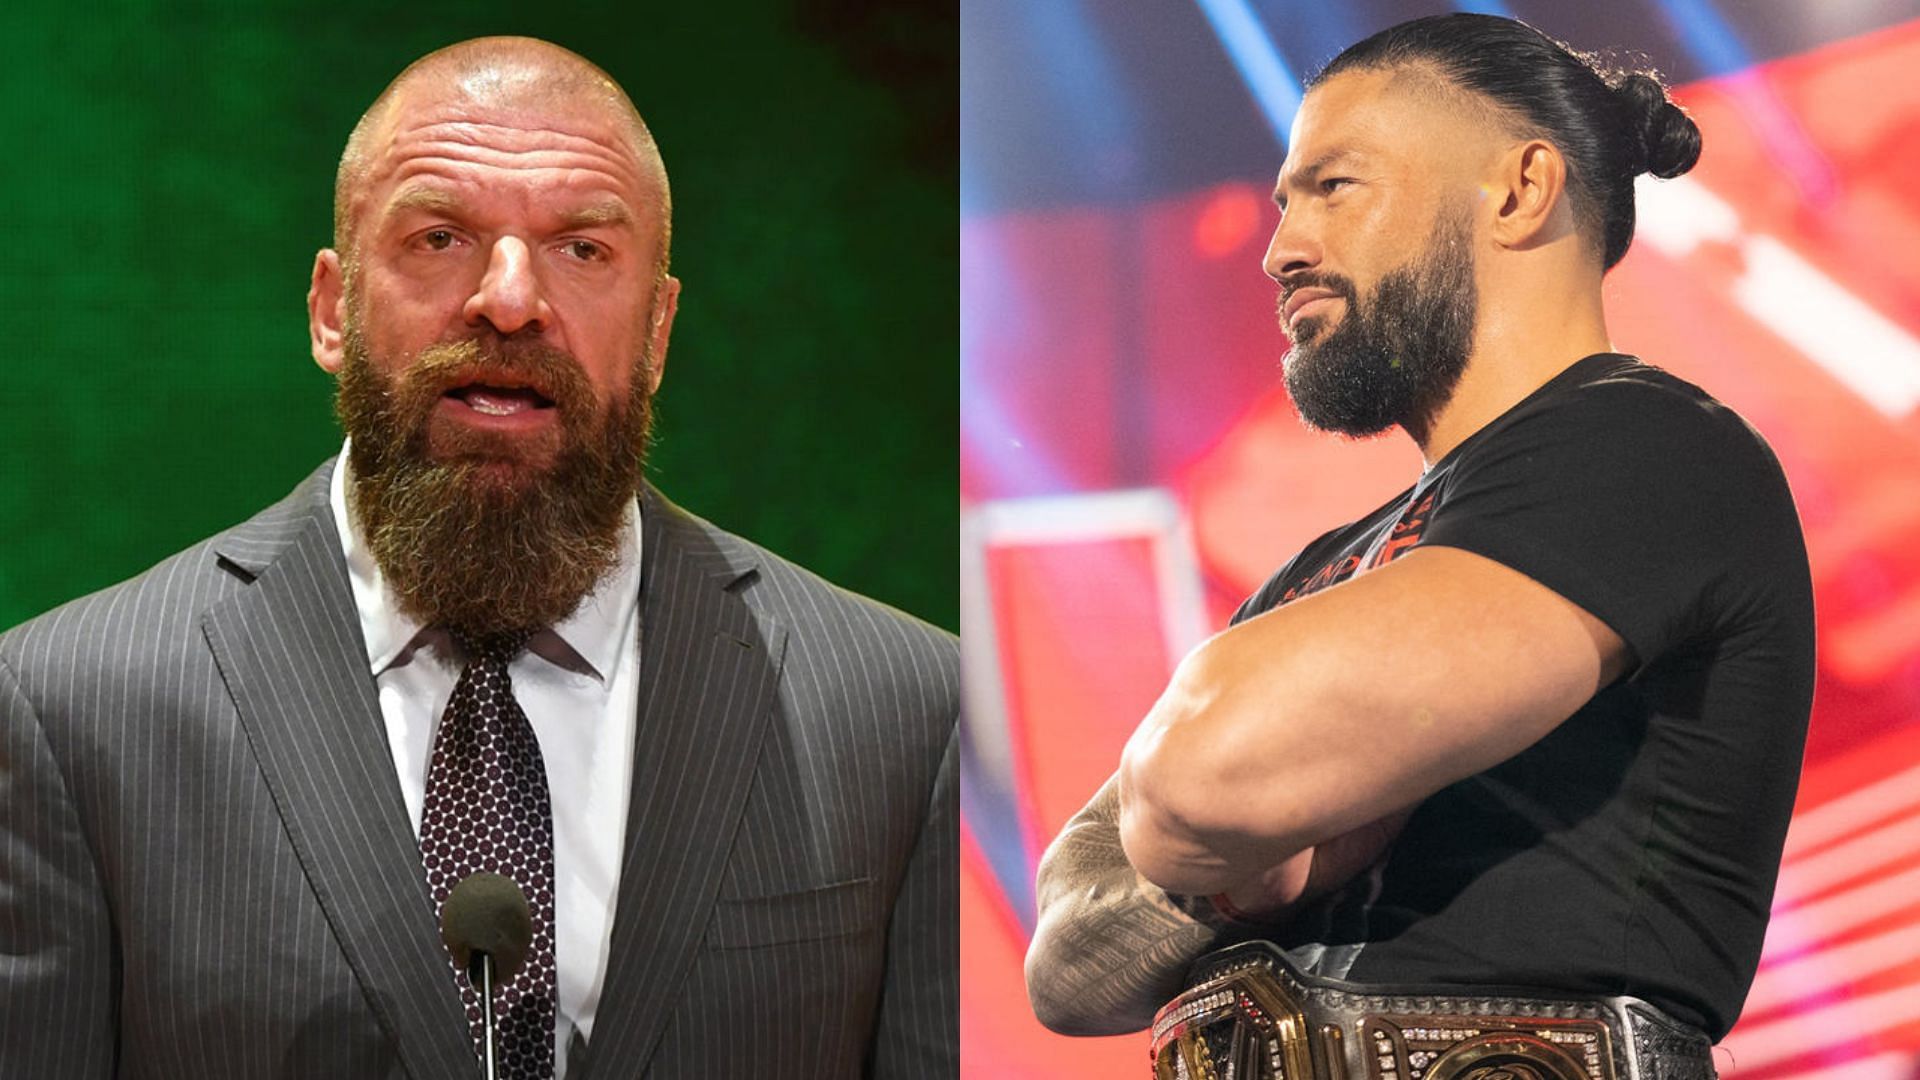 Triple H and Roman Reigns were the top names in the rumor mill.